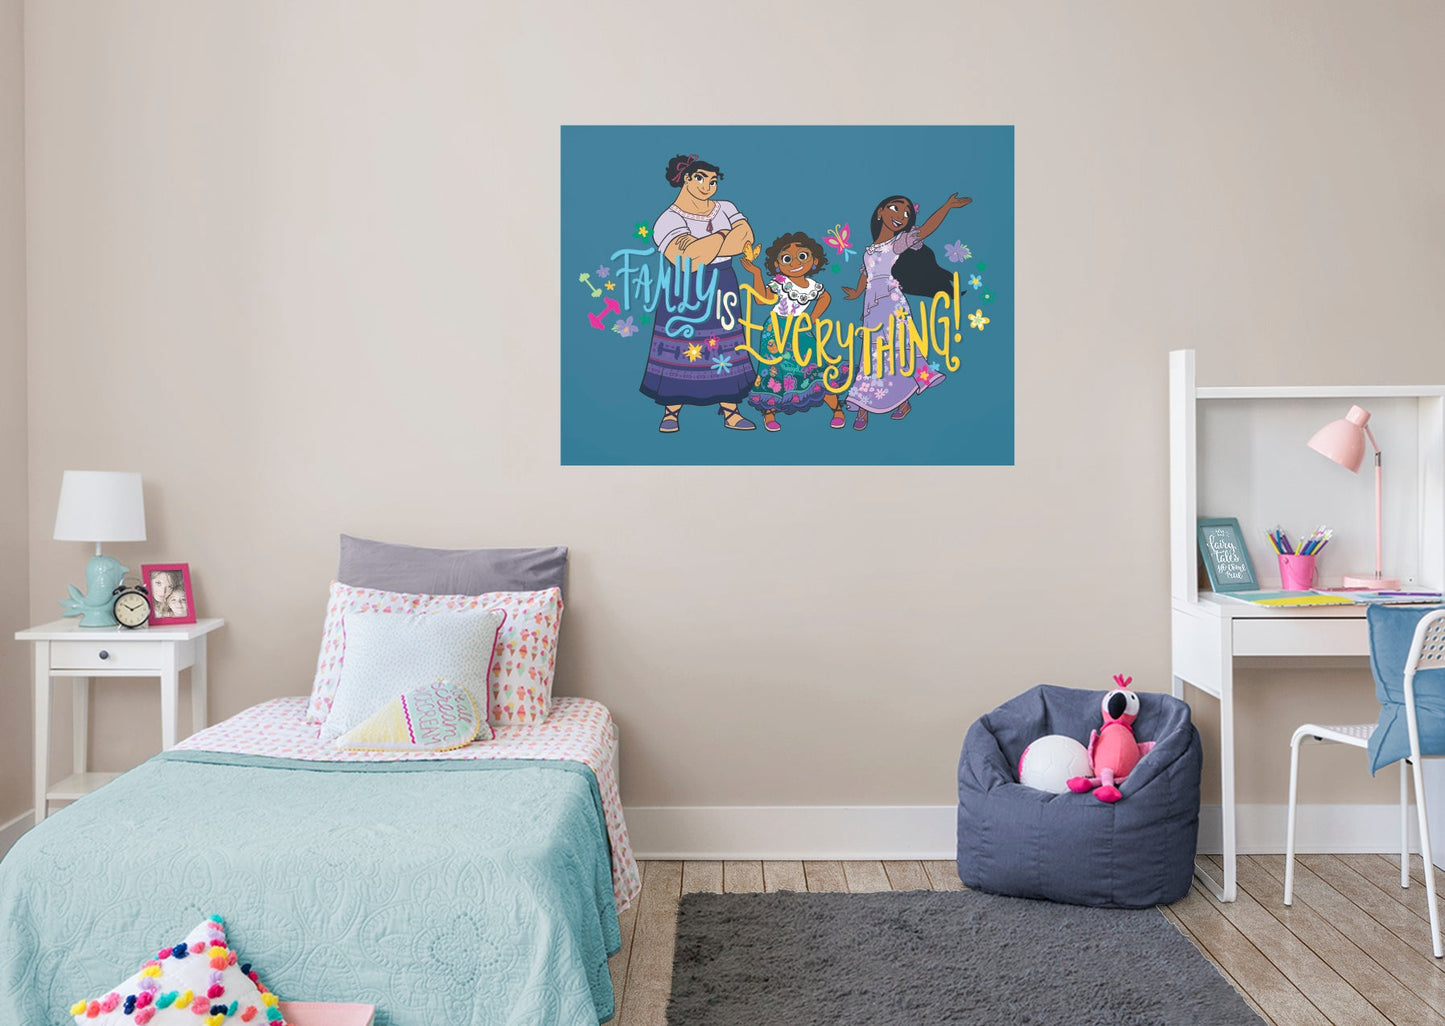 Encanto: Mirabel, Isabela, Luisa Family is Everything Poster - Officially Licensed Disney Removable Adhesive Decal